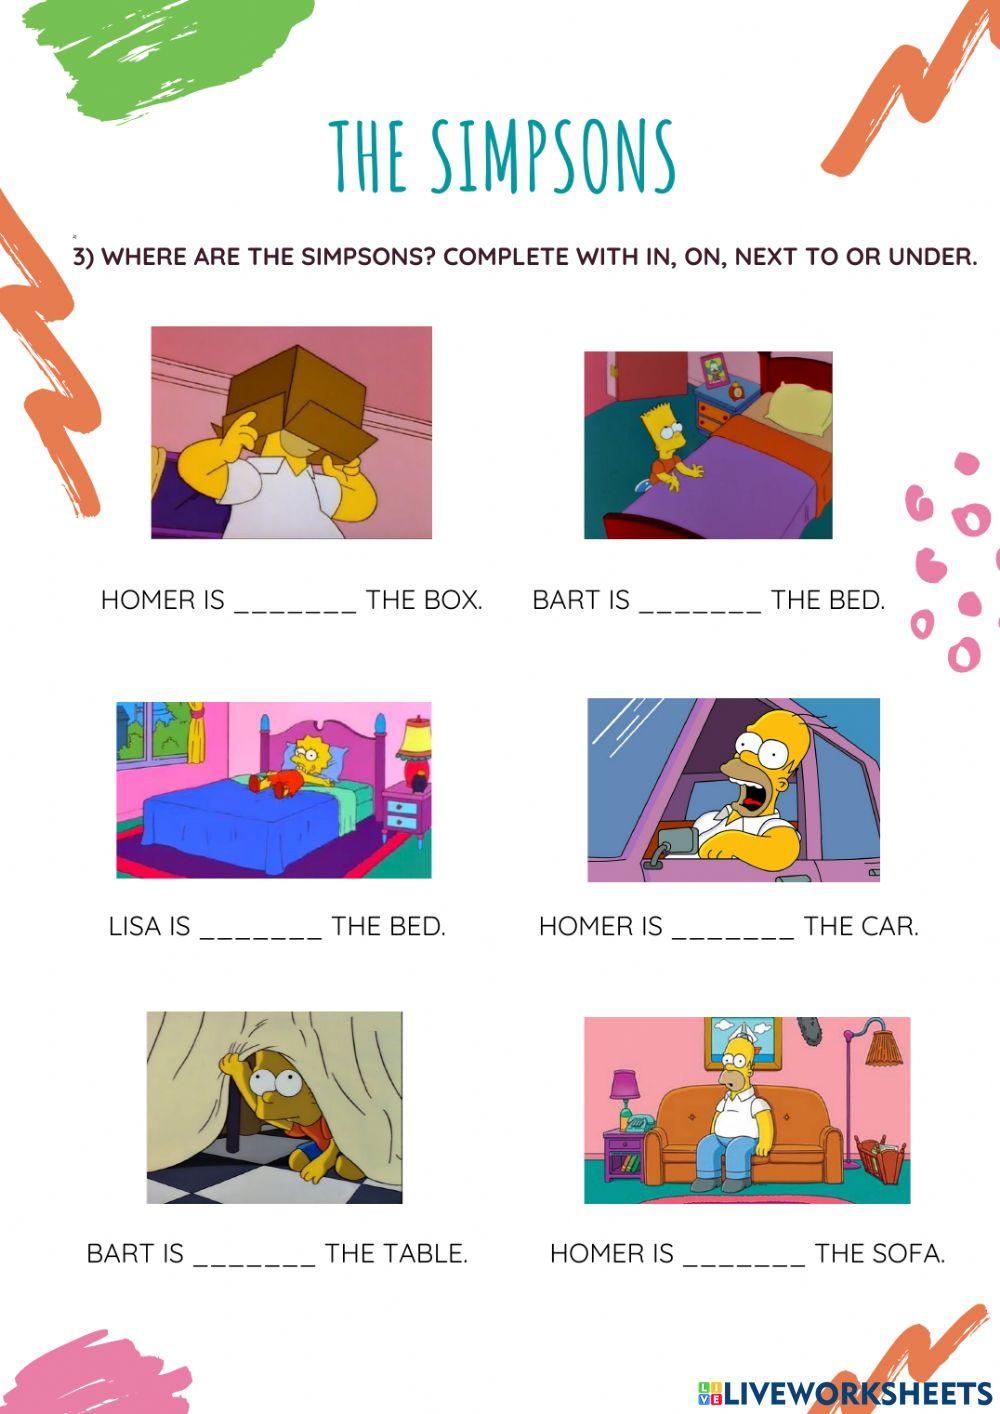 Family: the simpsons